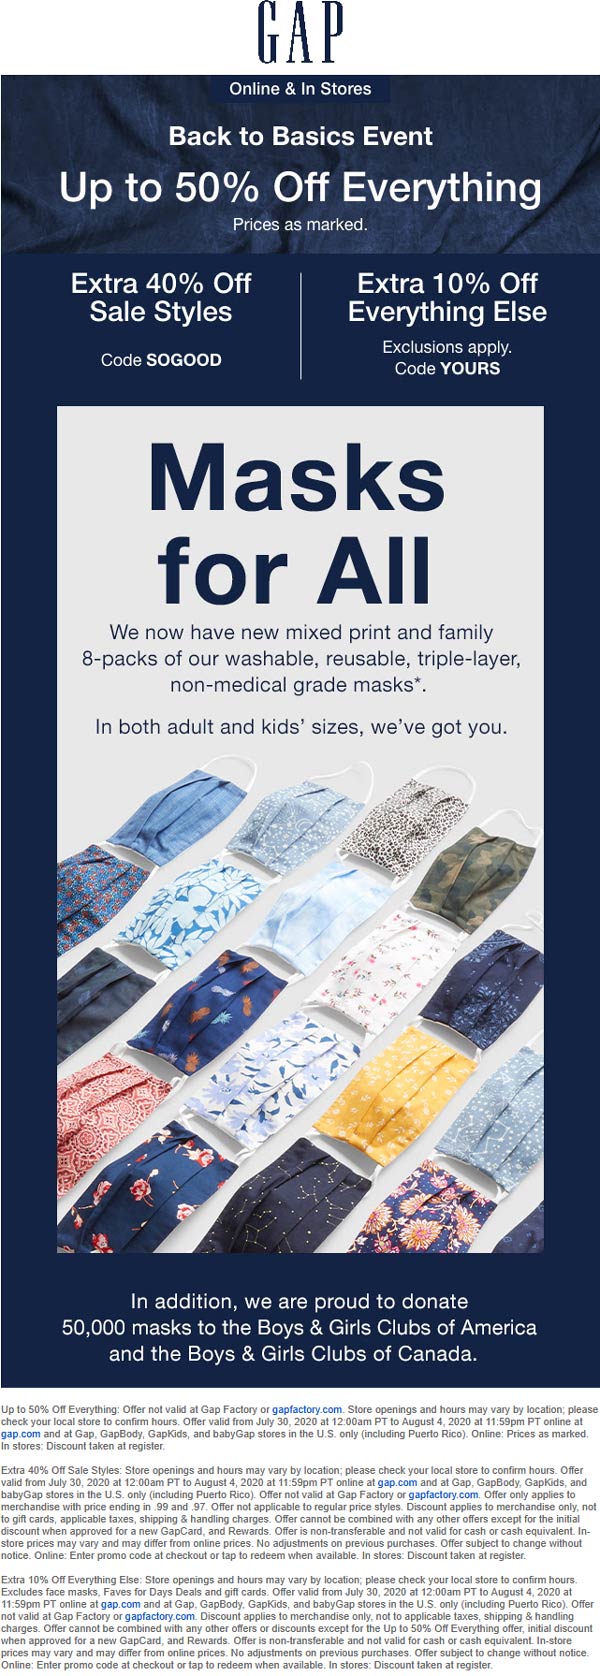 Gap stores Coupon  Extra 40% off sale items & more at Gap, or online via promo code SOGOOD #gap 